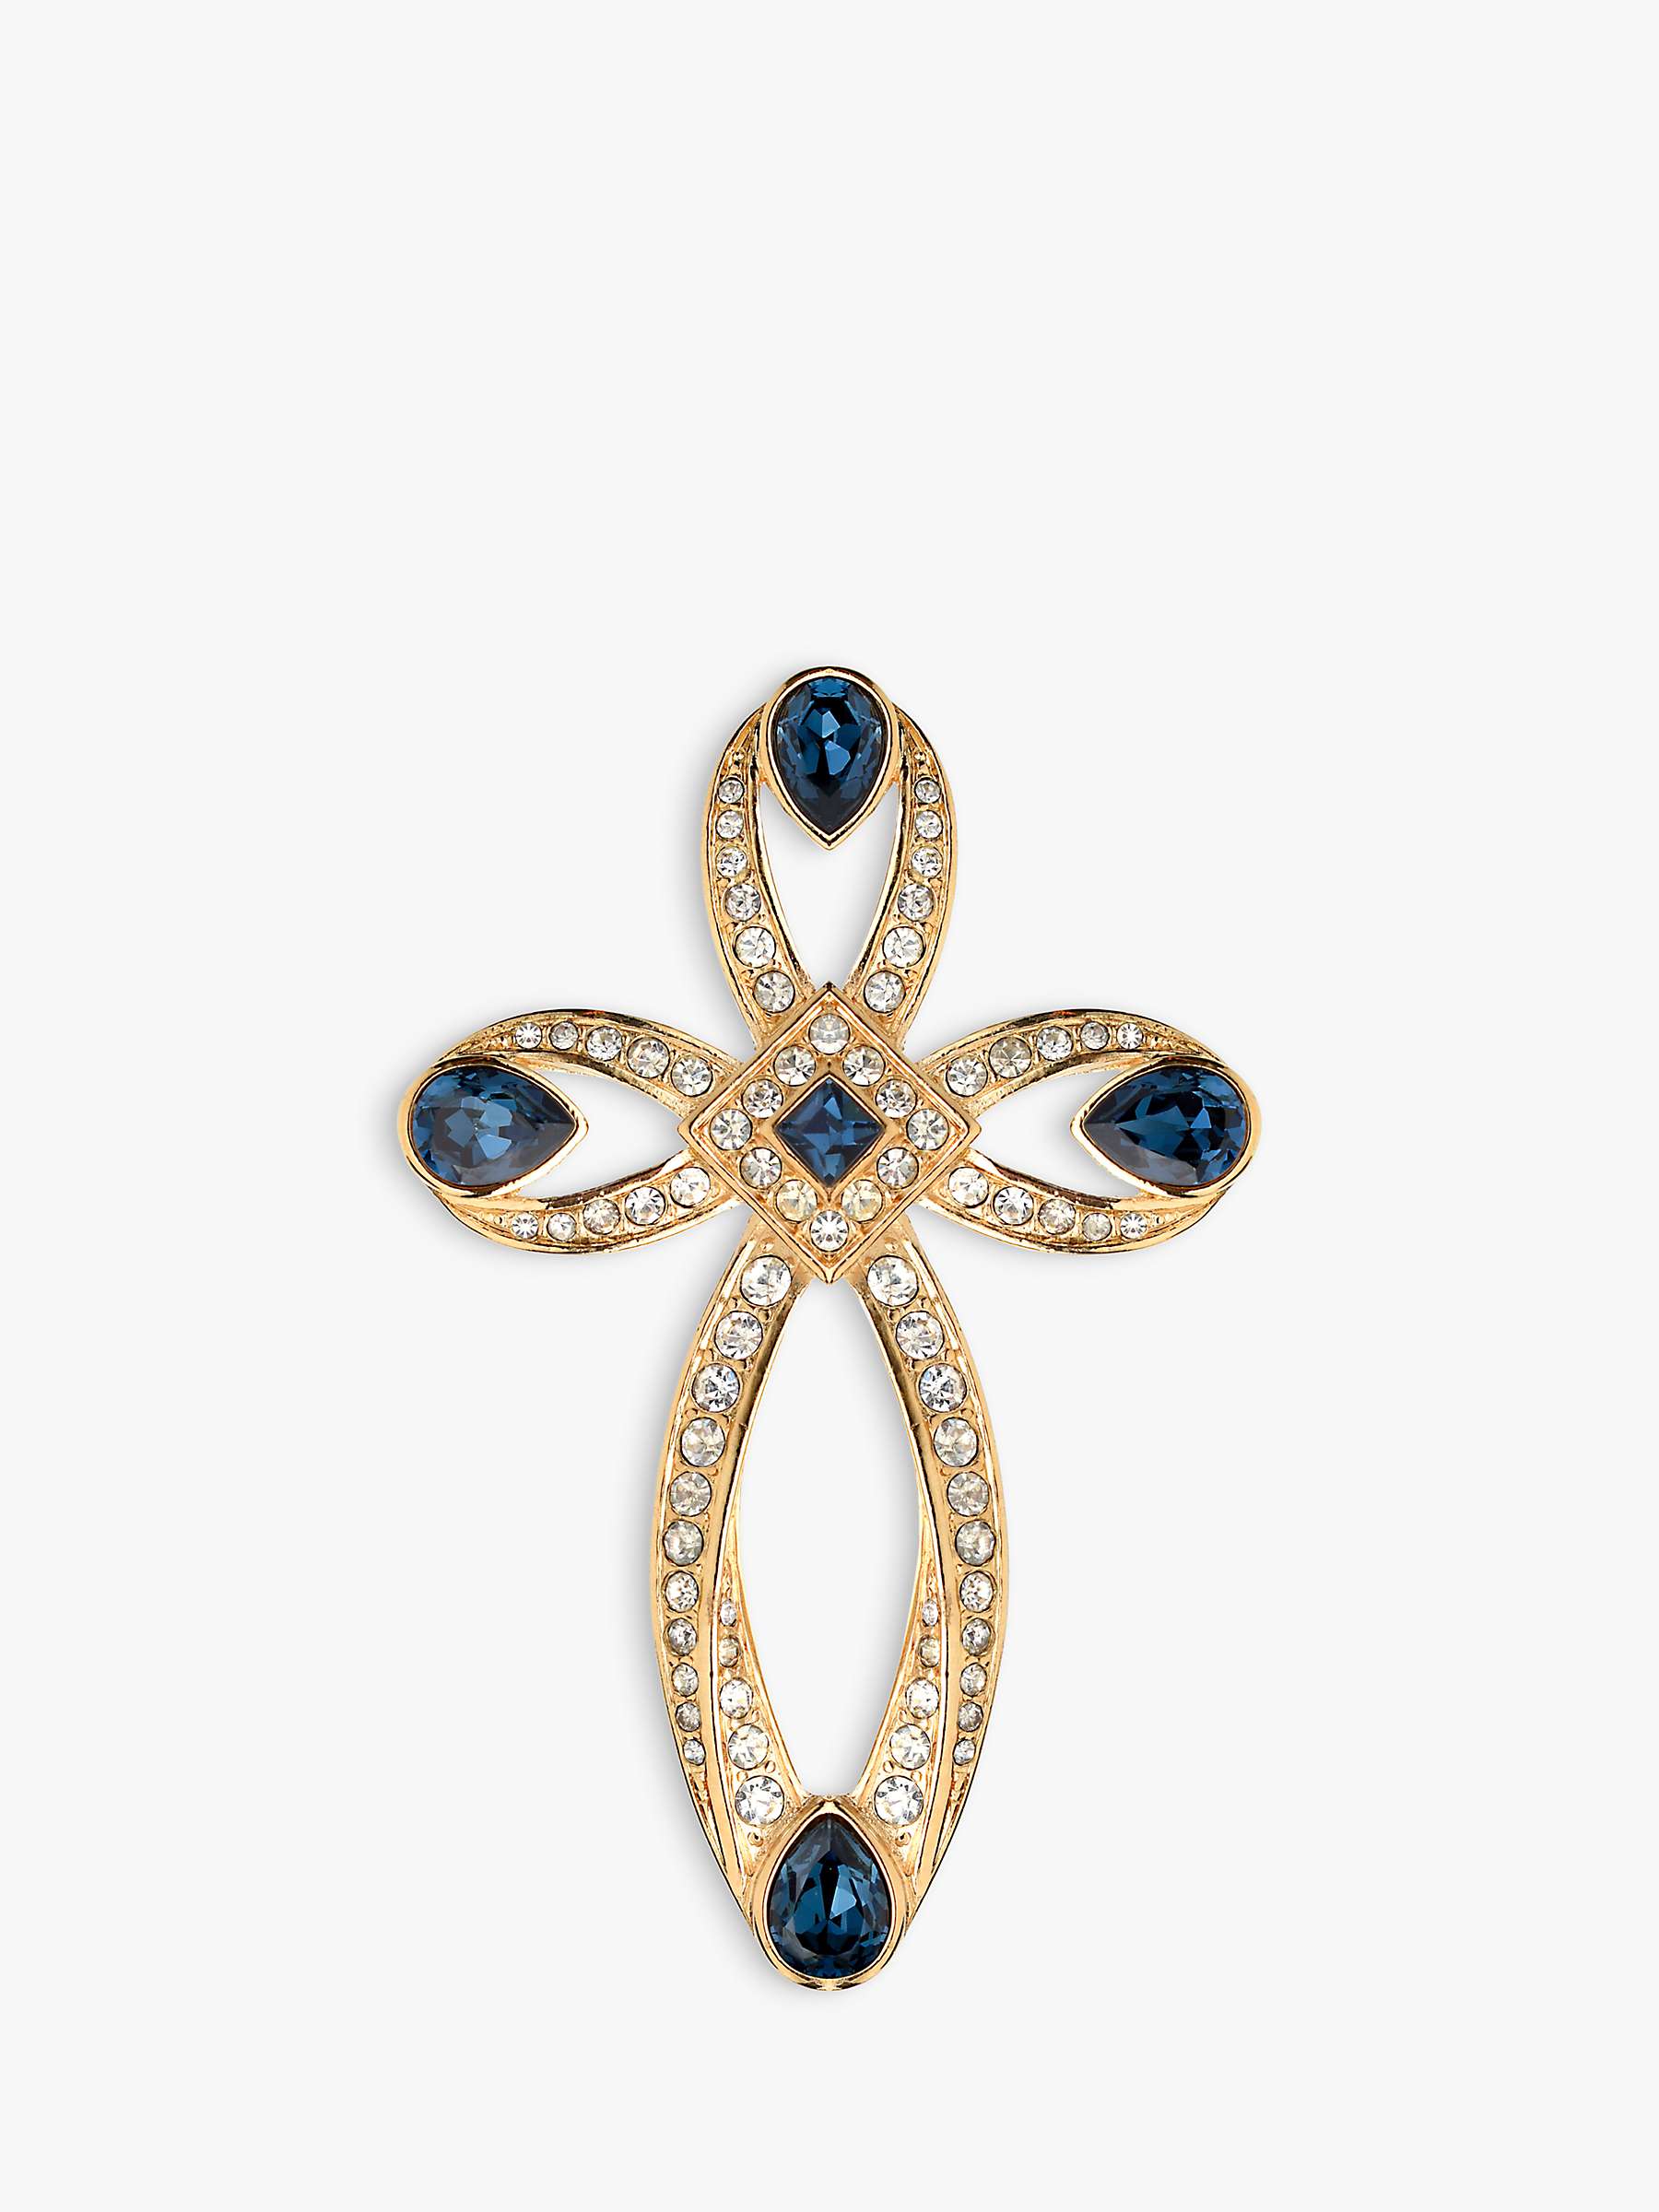 Buy Eclectica Vintage Attwood & Sawyer Swarovski Crystal Cross Brooch, Dated Circa the 1990s Online at johnlewis.com